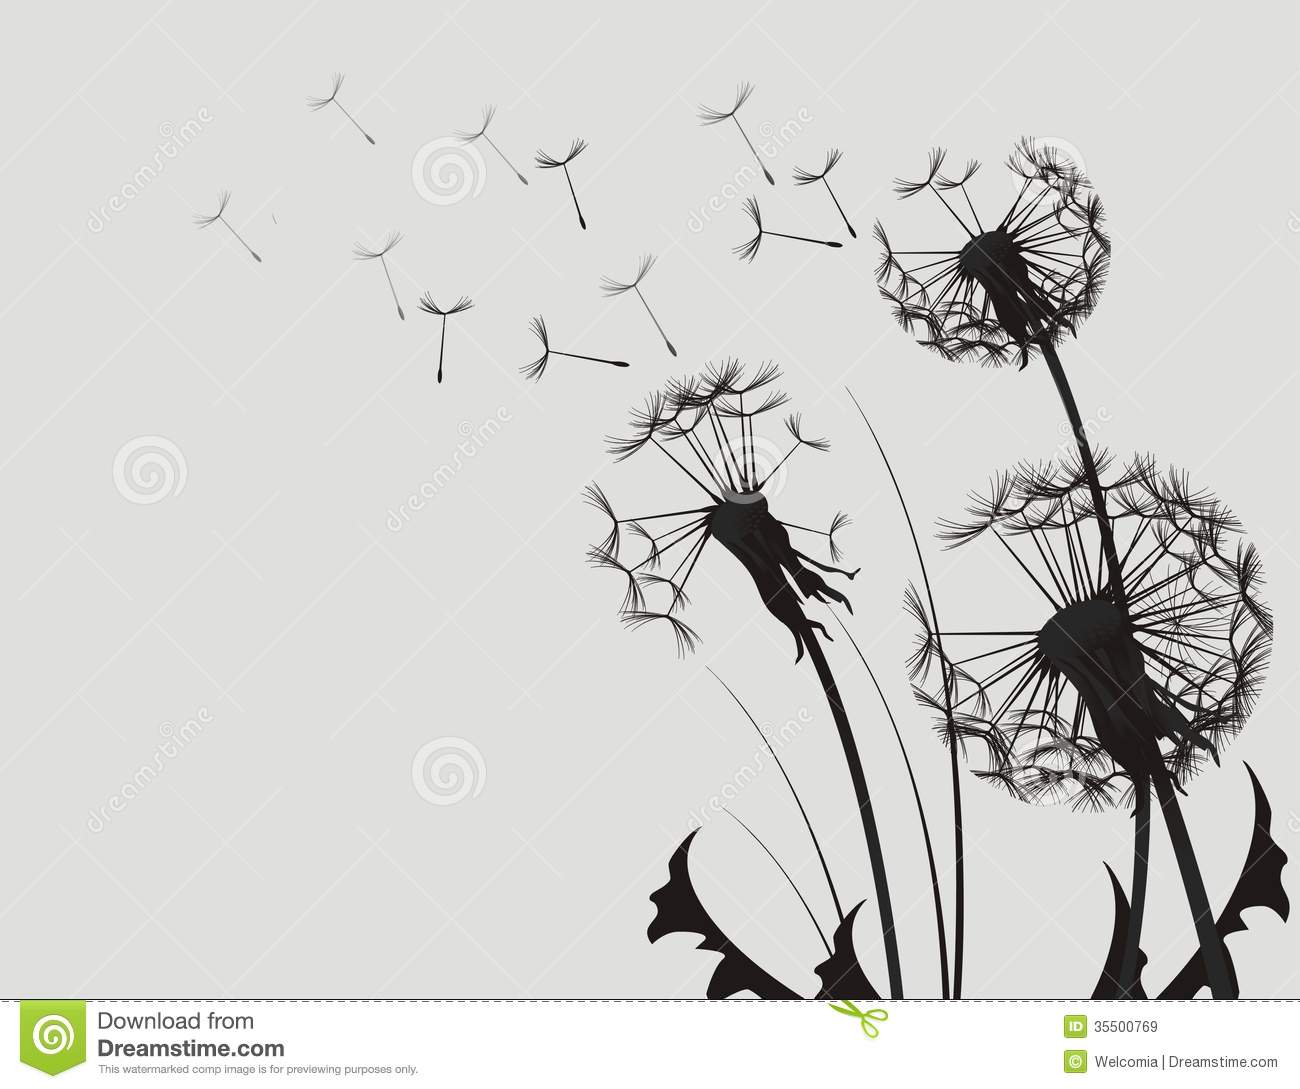 Dandelion Silhouette Royalty Free Stock Images   Image  35500769